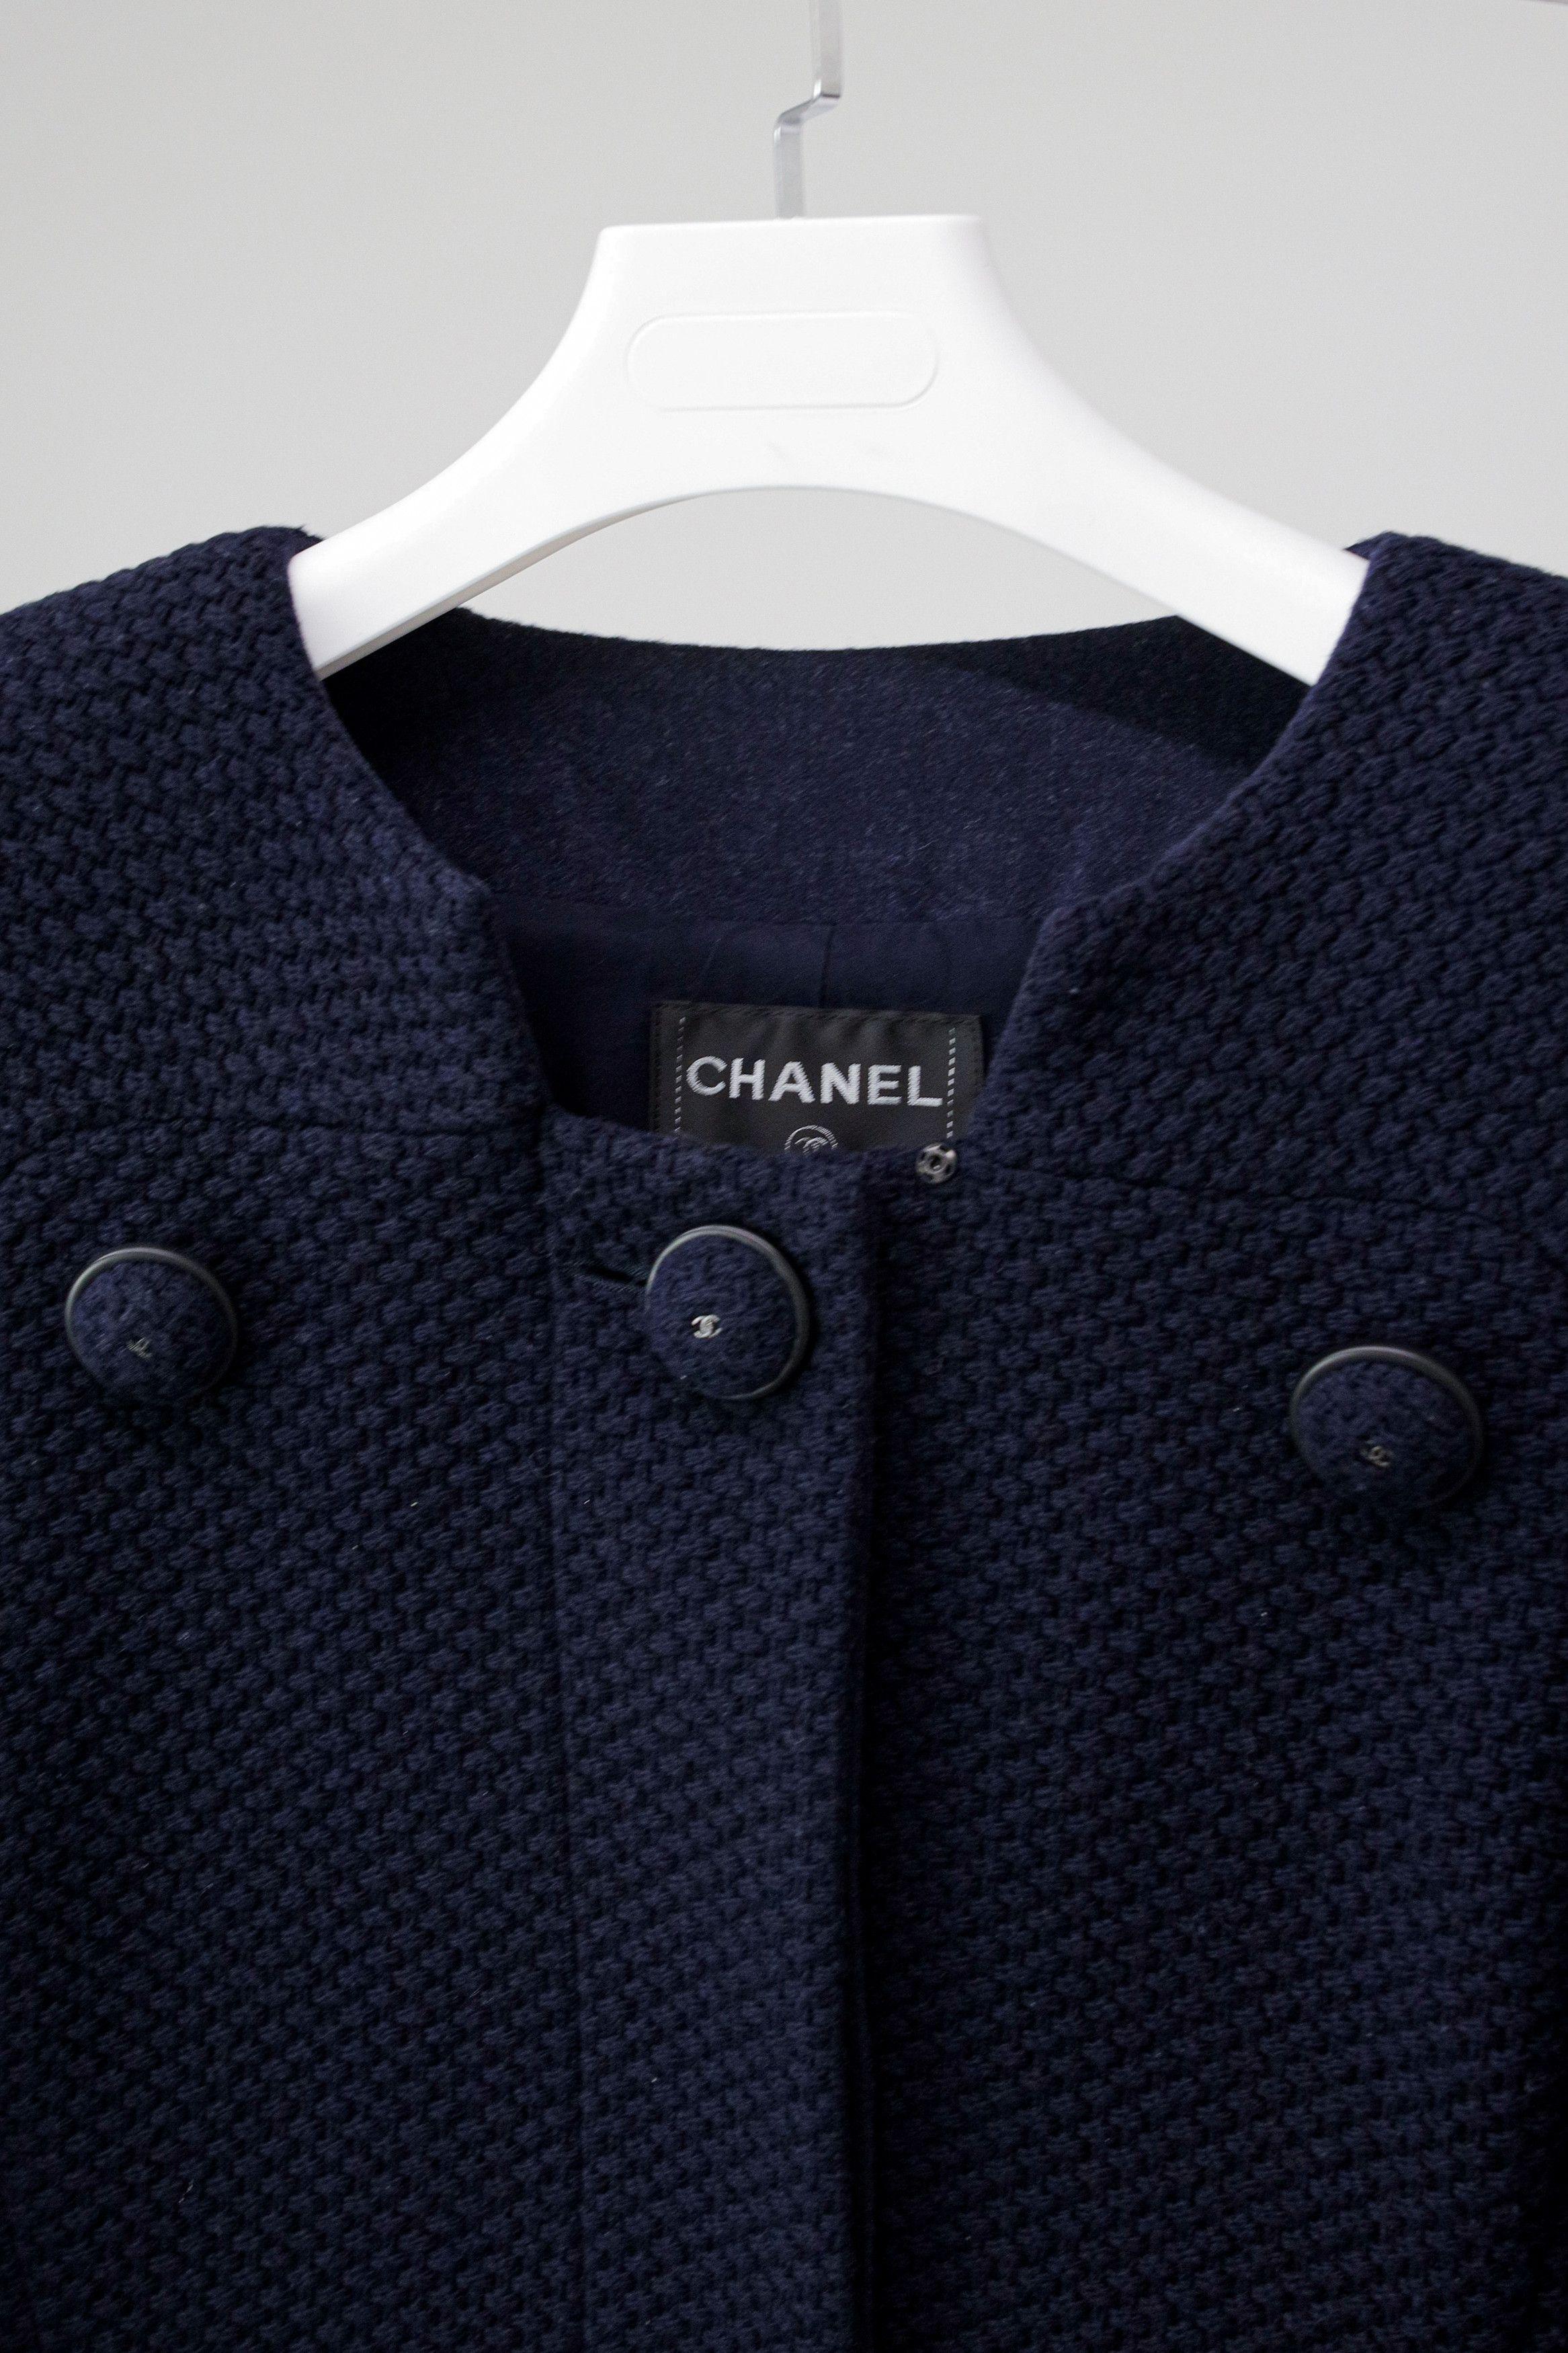 Chanel CC Massive Buttons Tweed Jacket  In Excellent Condition For Sale In Dubai, AE